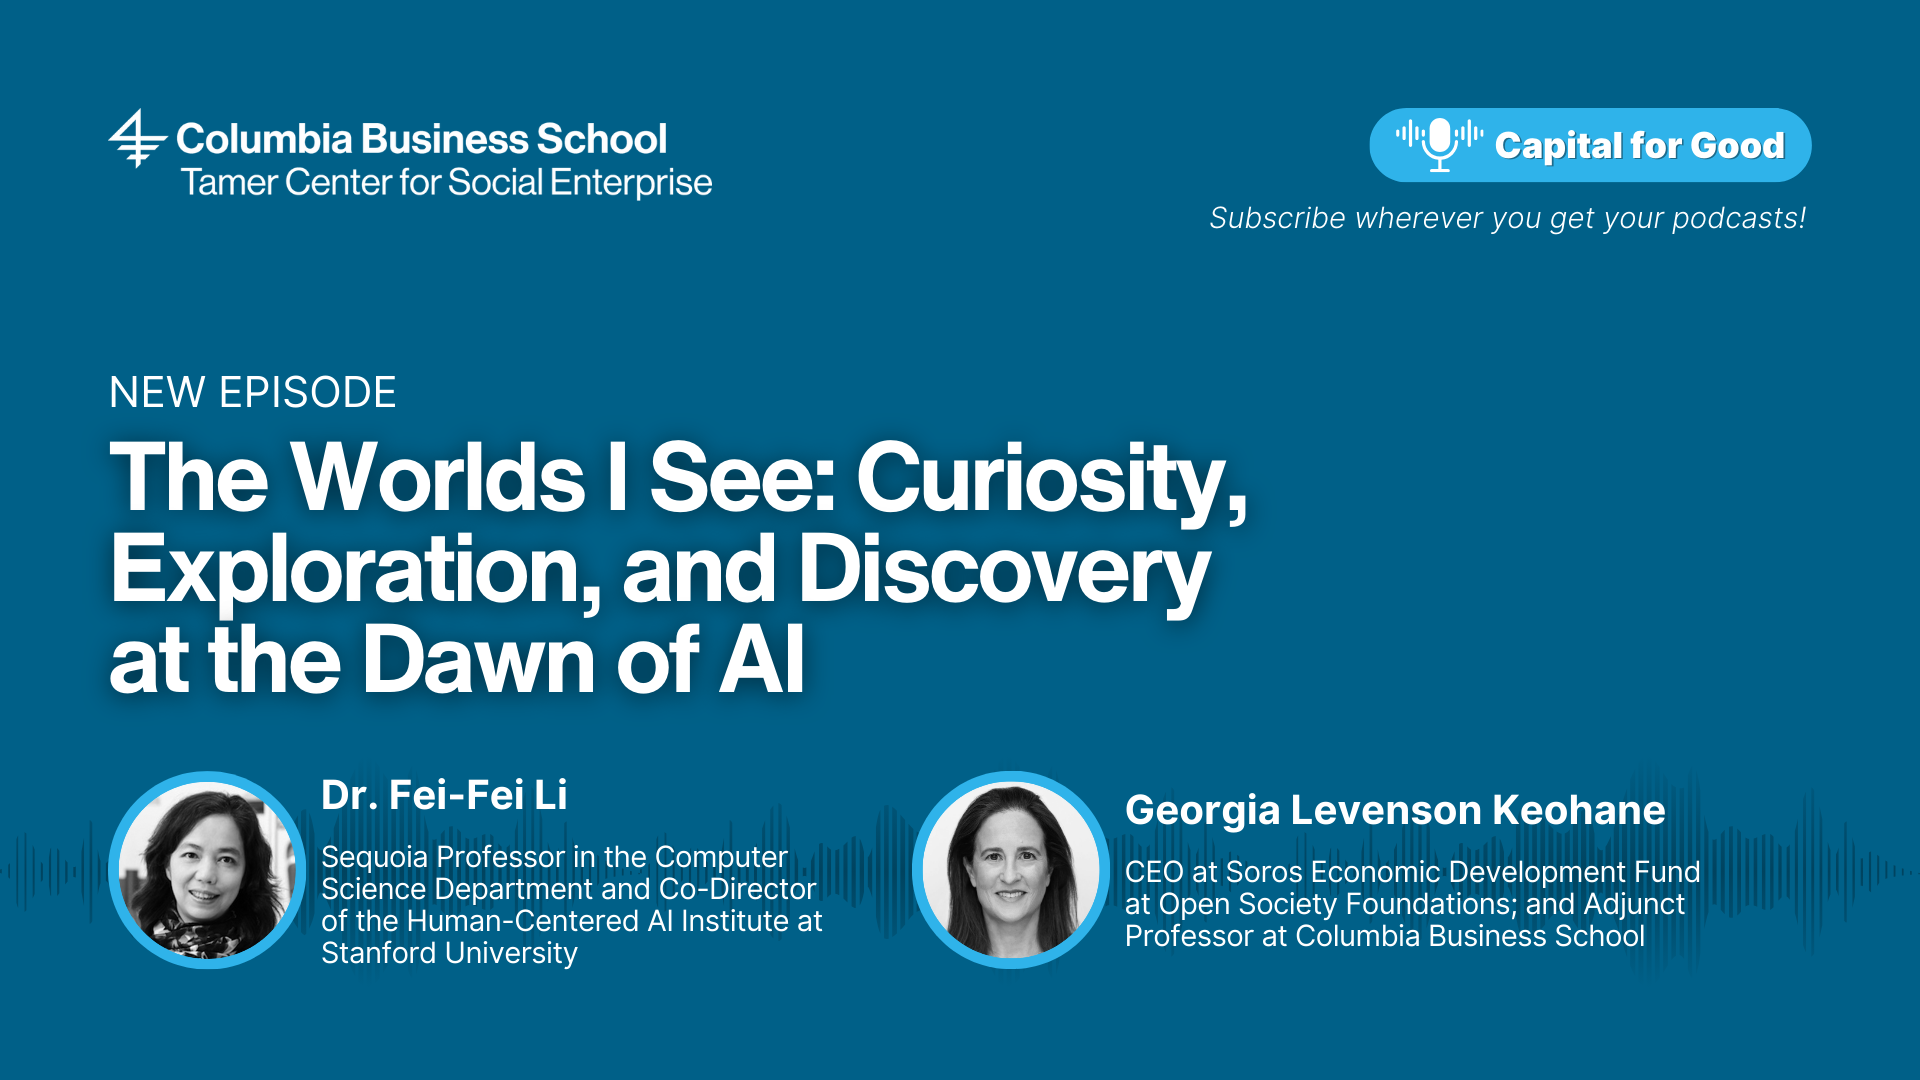 Capital for Good Podcast: Luis Miranda: Dr. Fei-Fei Li: The Worlds I See: Curiosity, Exploration, and Discovery at the Dawn of AI